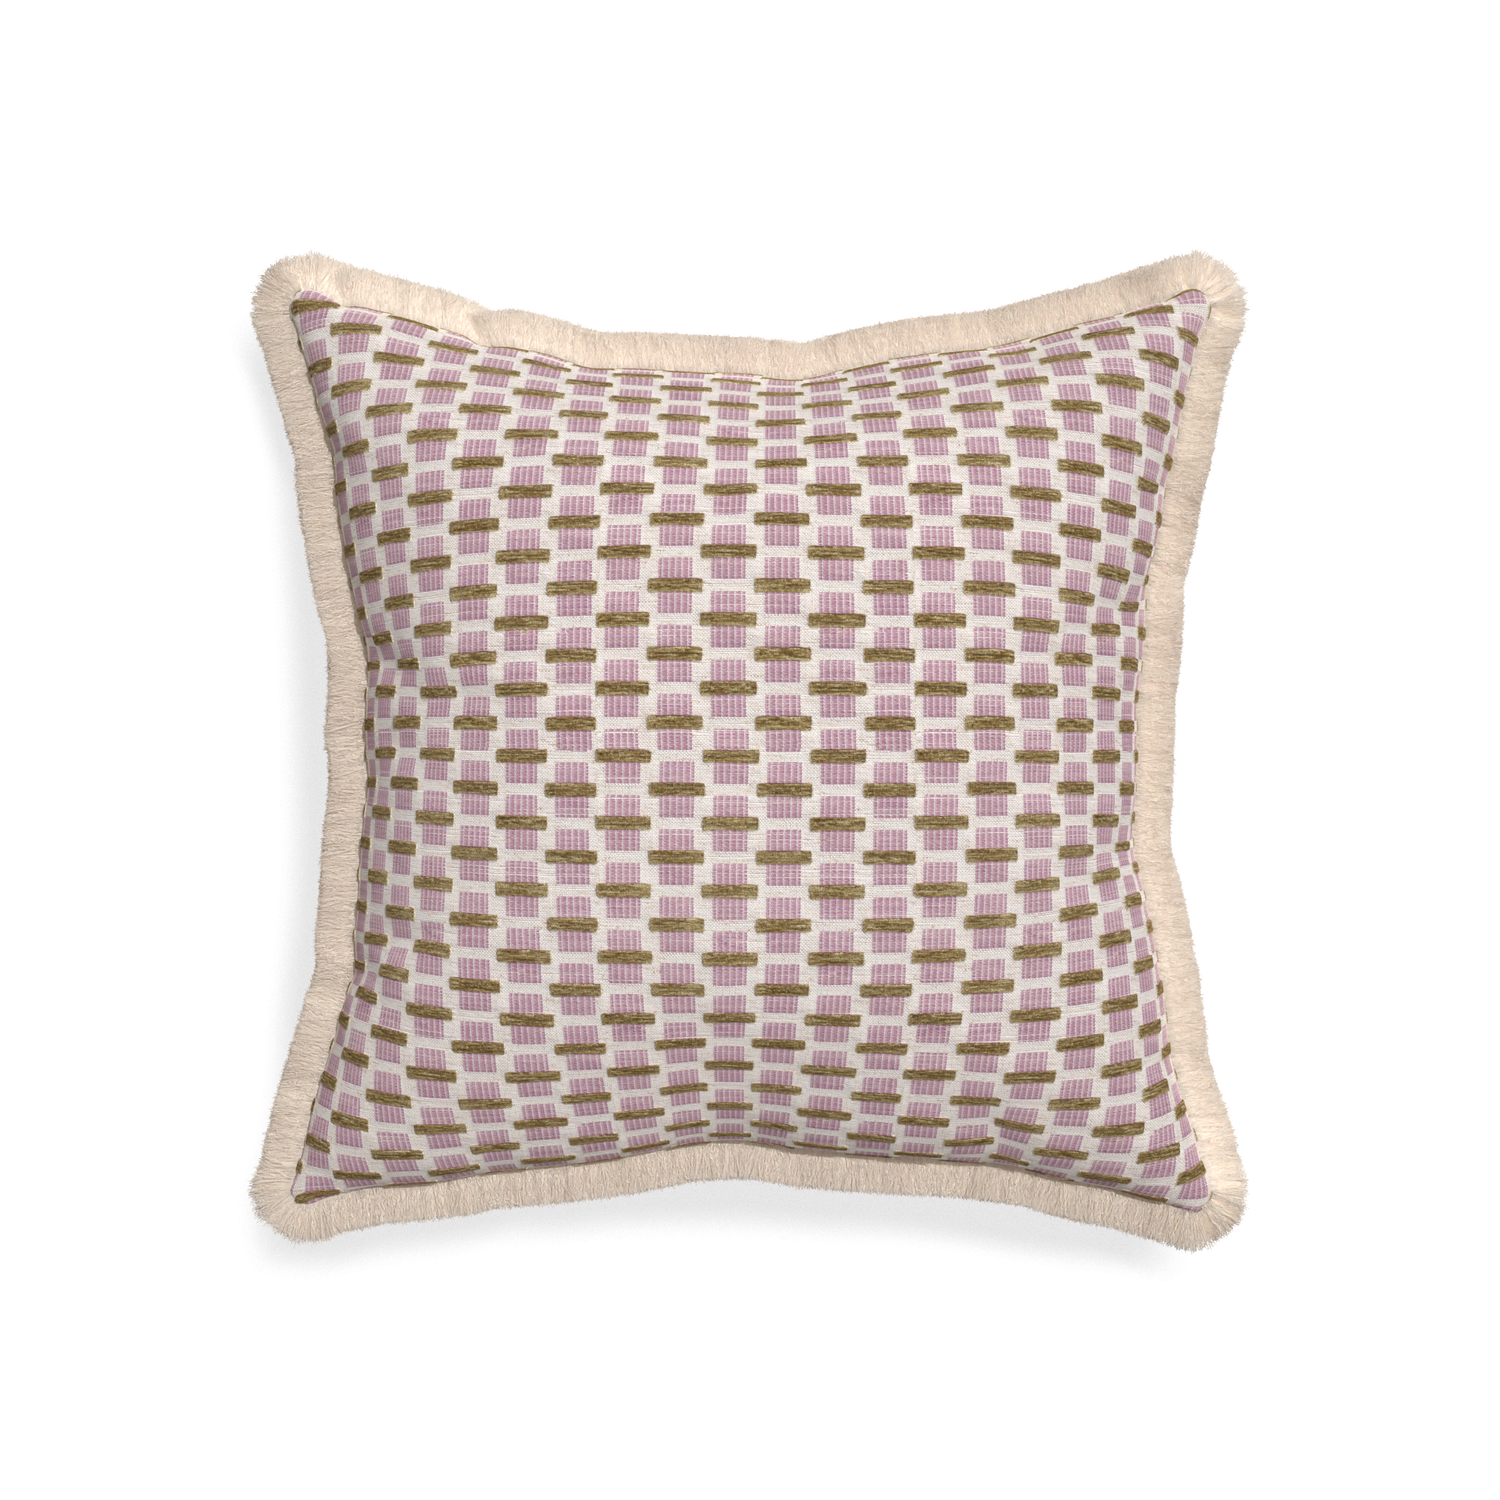 20-square willow orchid custom pink geometric chenillepillow with cream fringe on white background